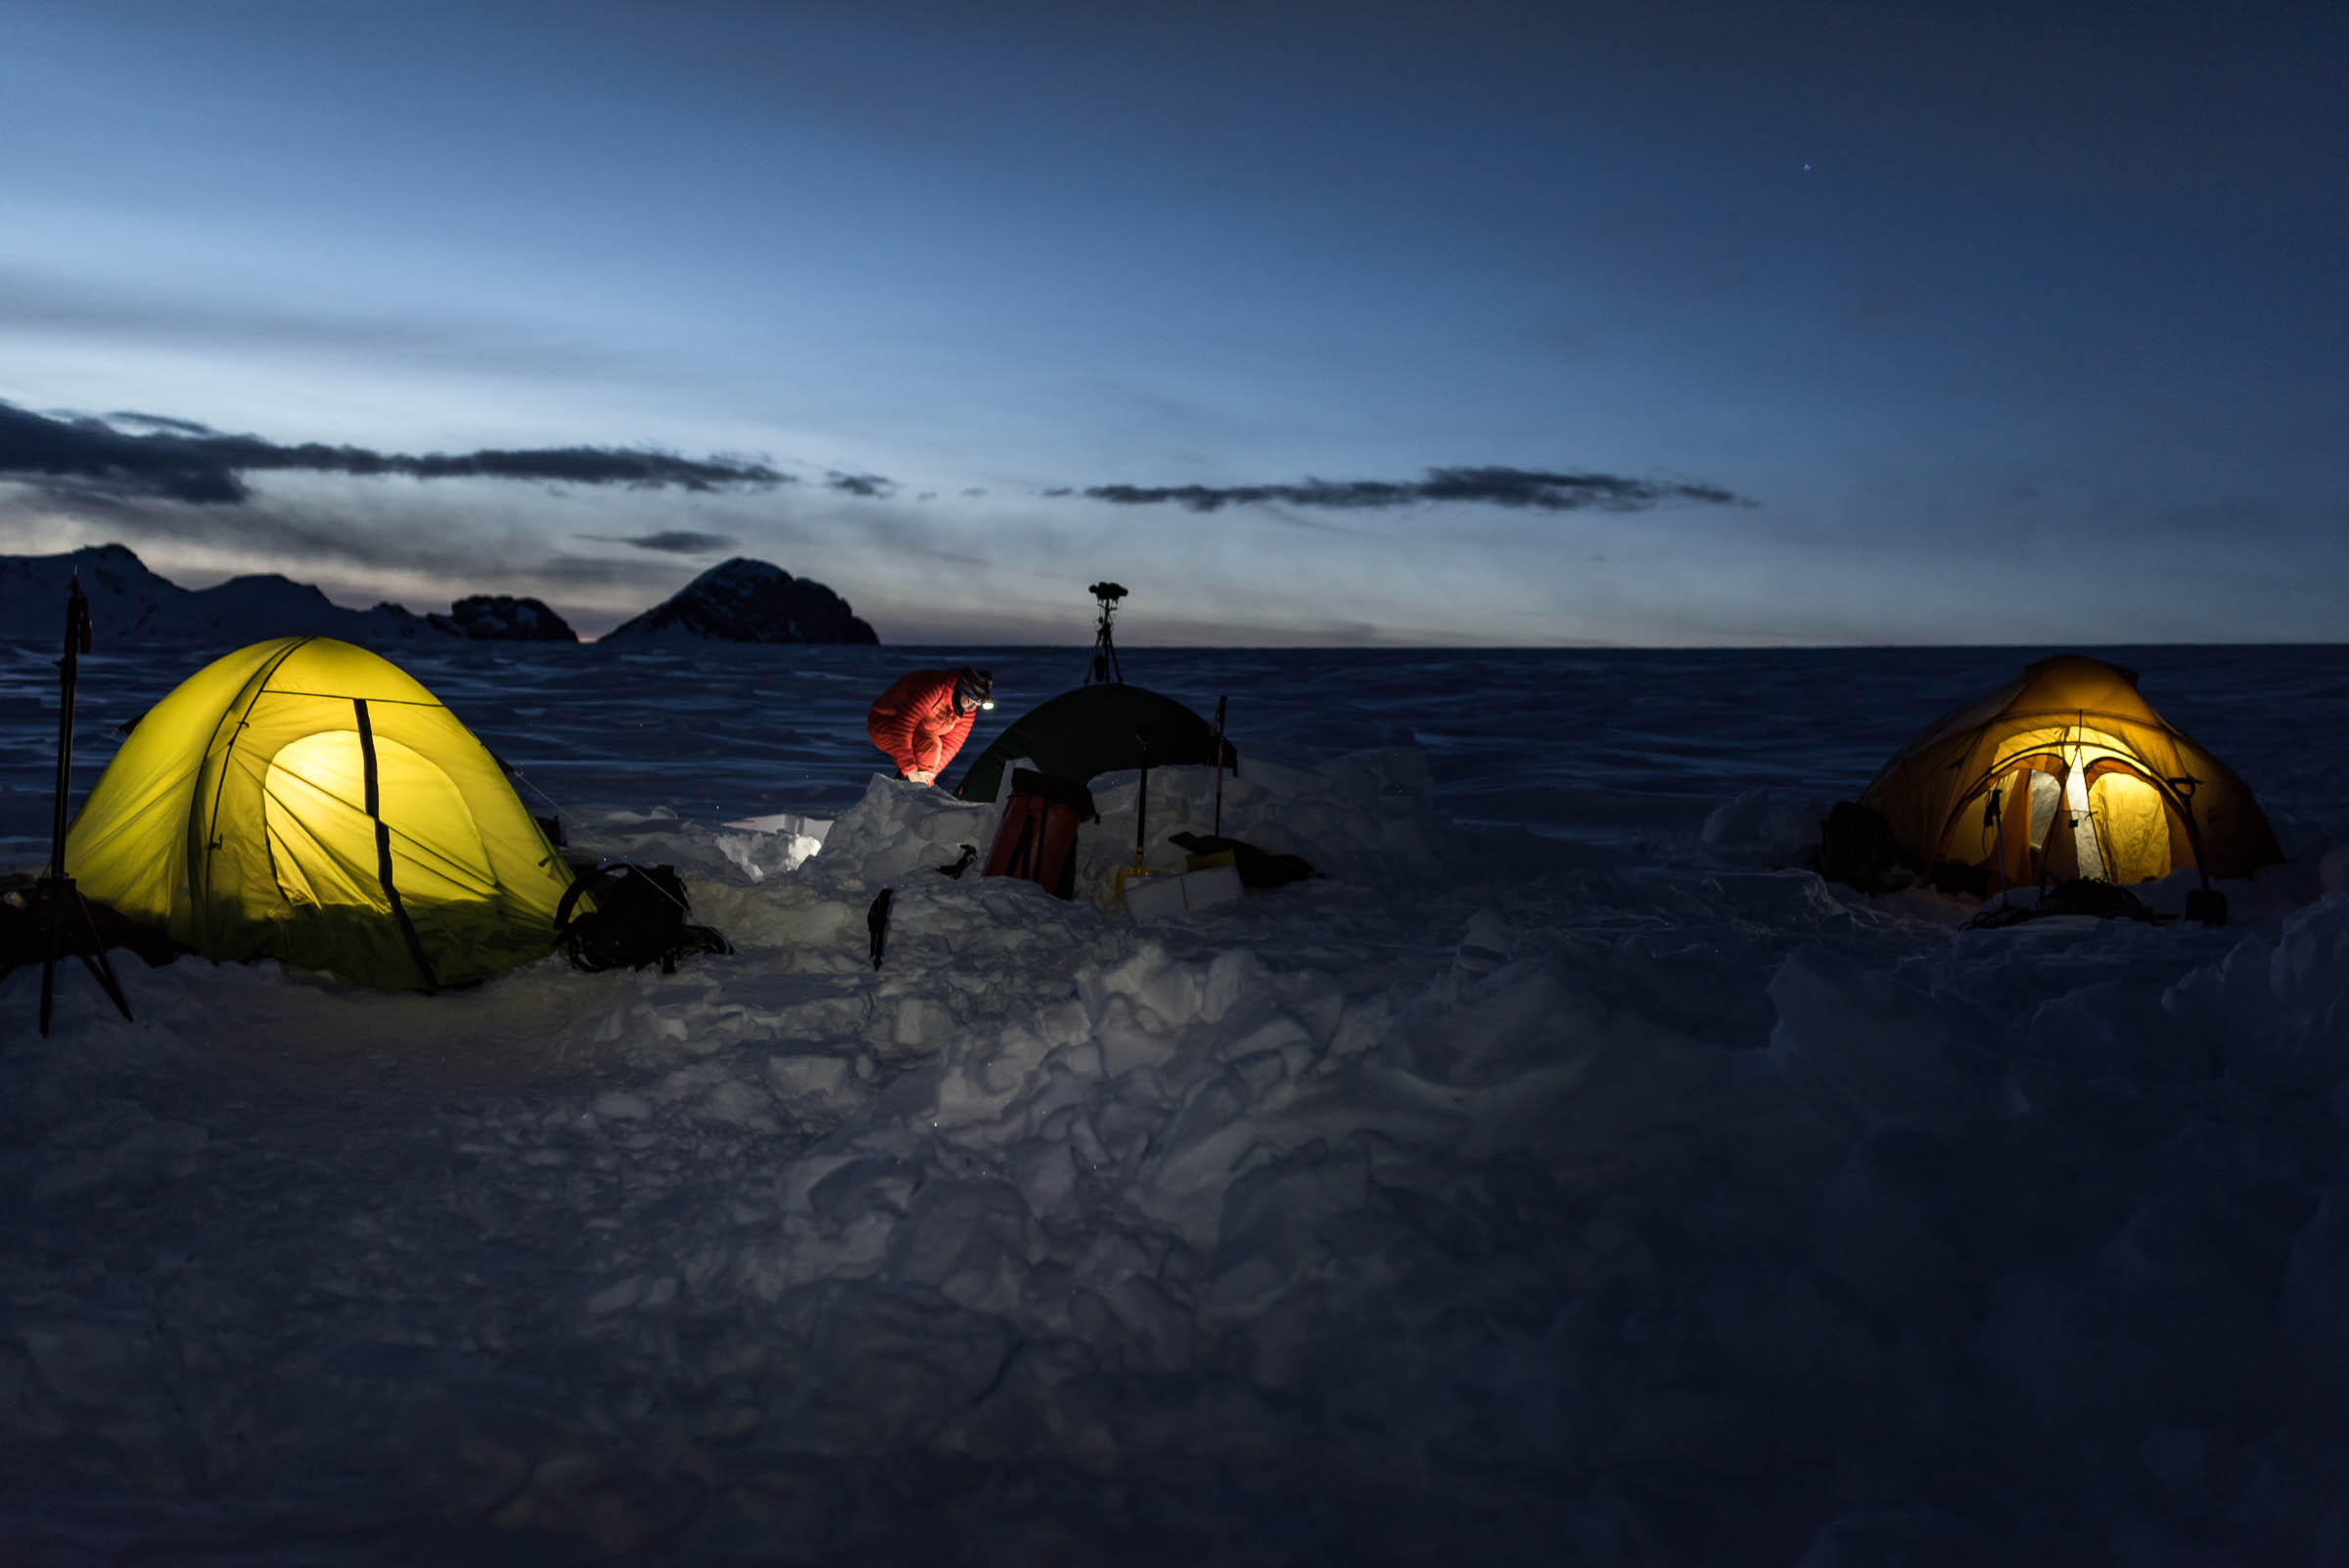 Base camp on the glacier. Photo taken at night with lights in tents.